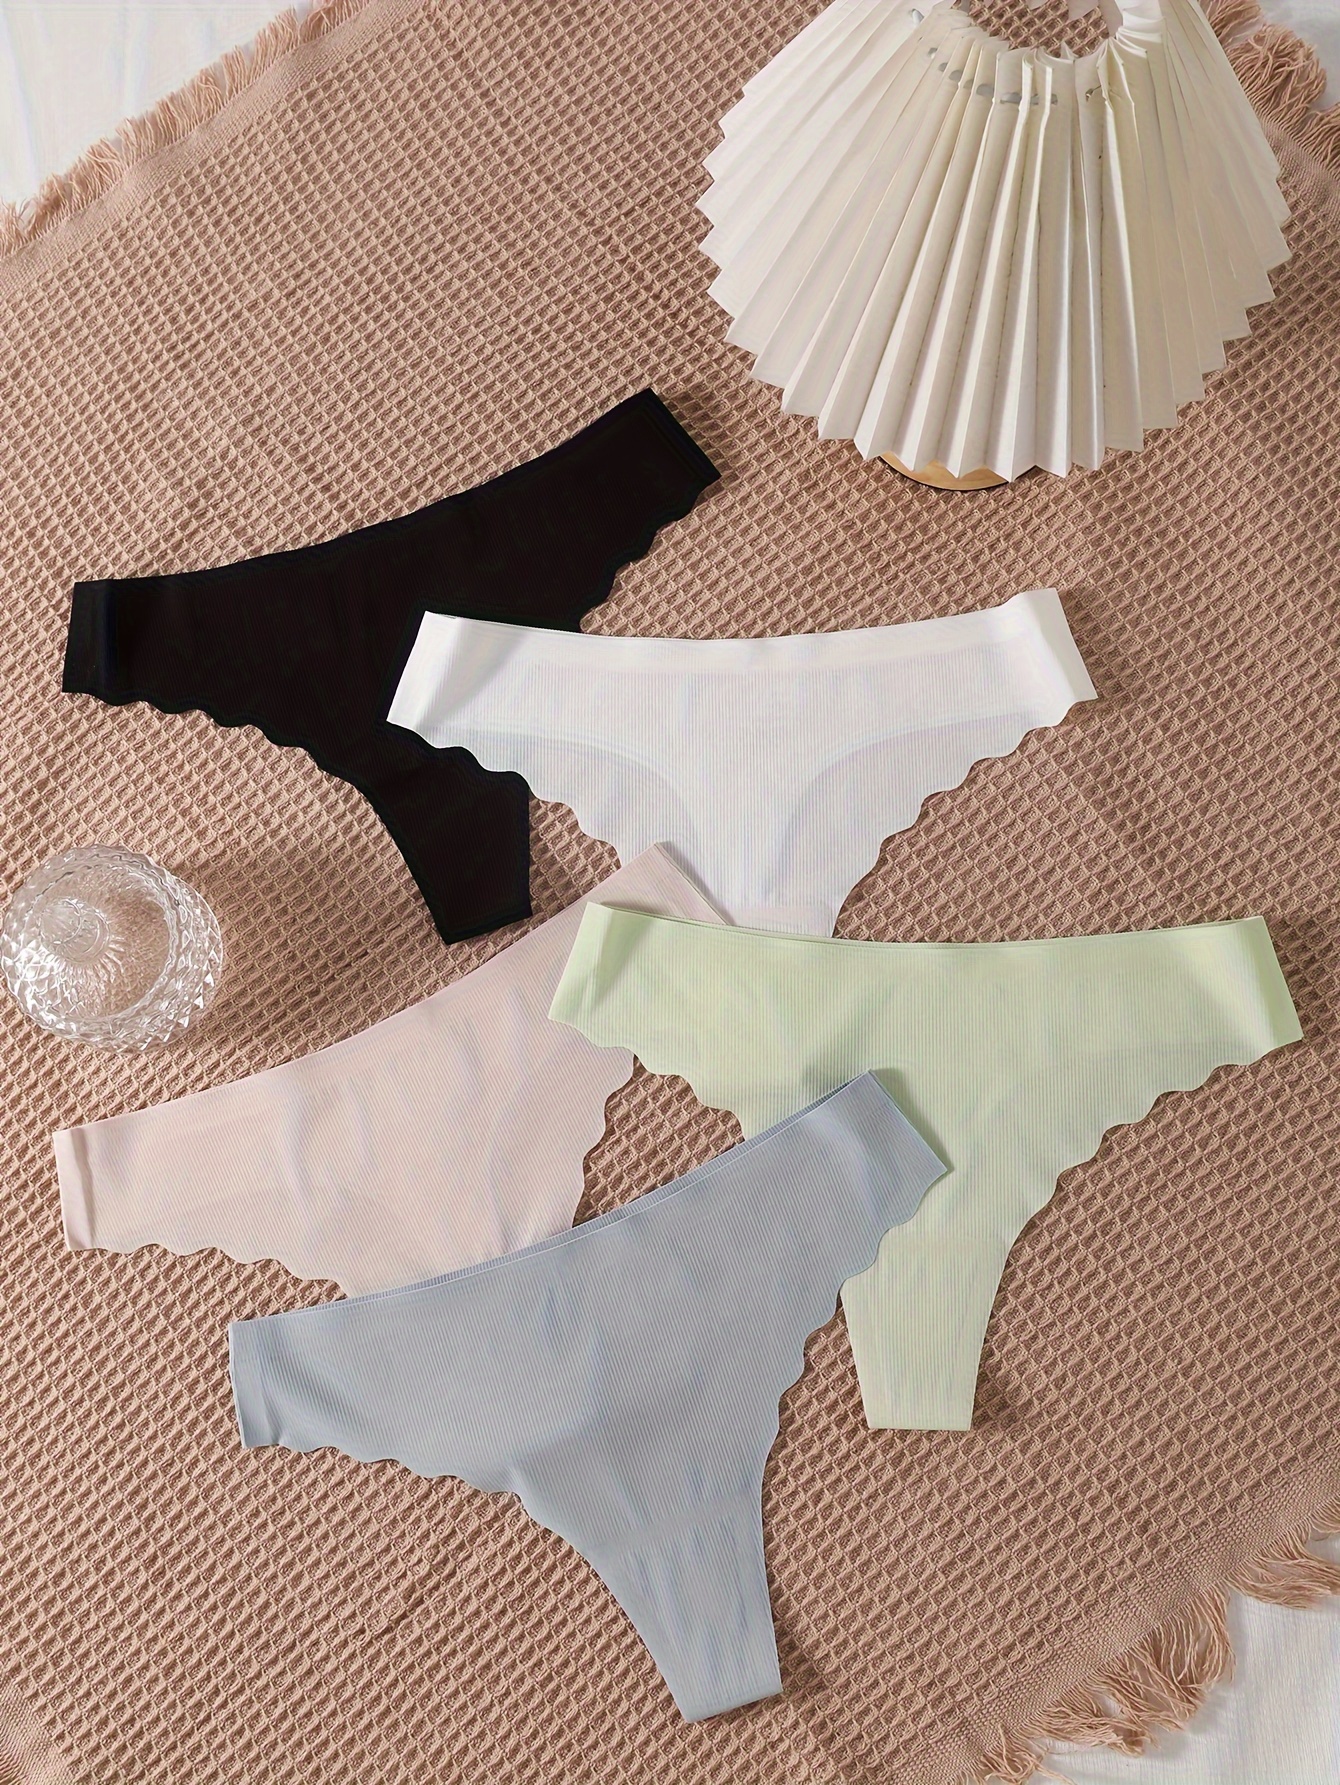 5pcs Scallop Trim Thongs, Seamless & Comfy Stretchy Intimates Panties,  Women's Lingerie & Underwear